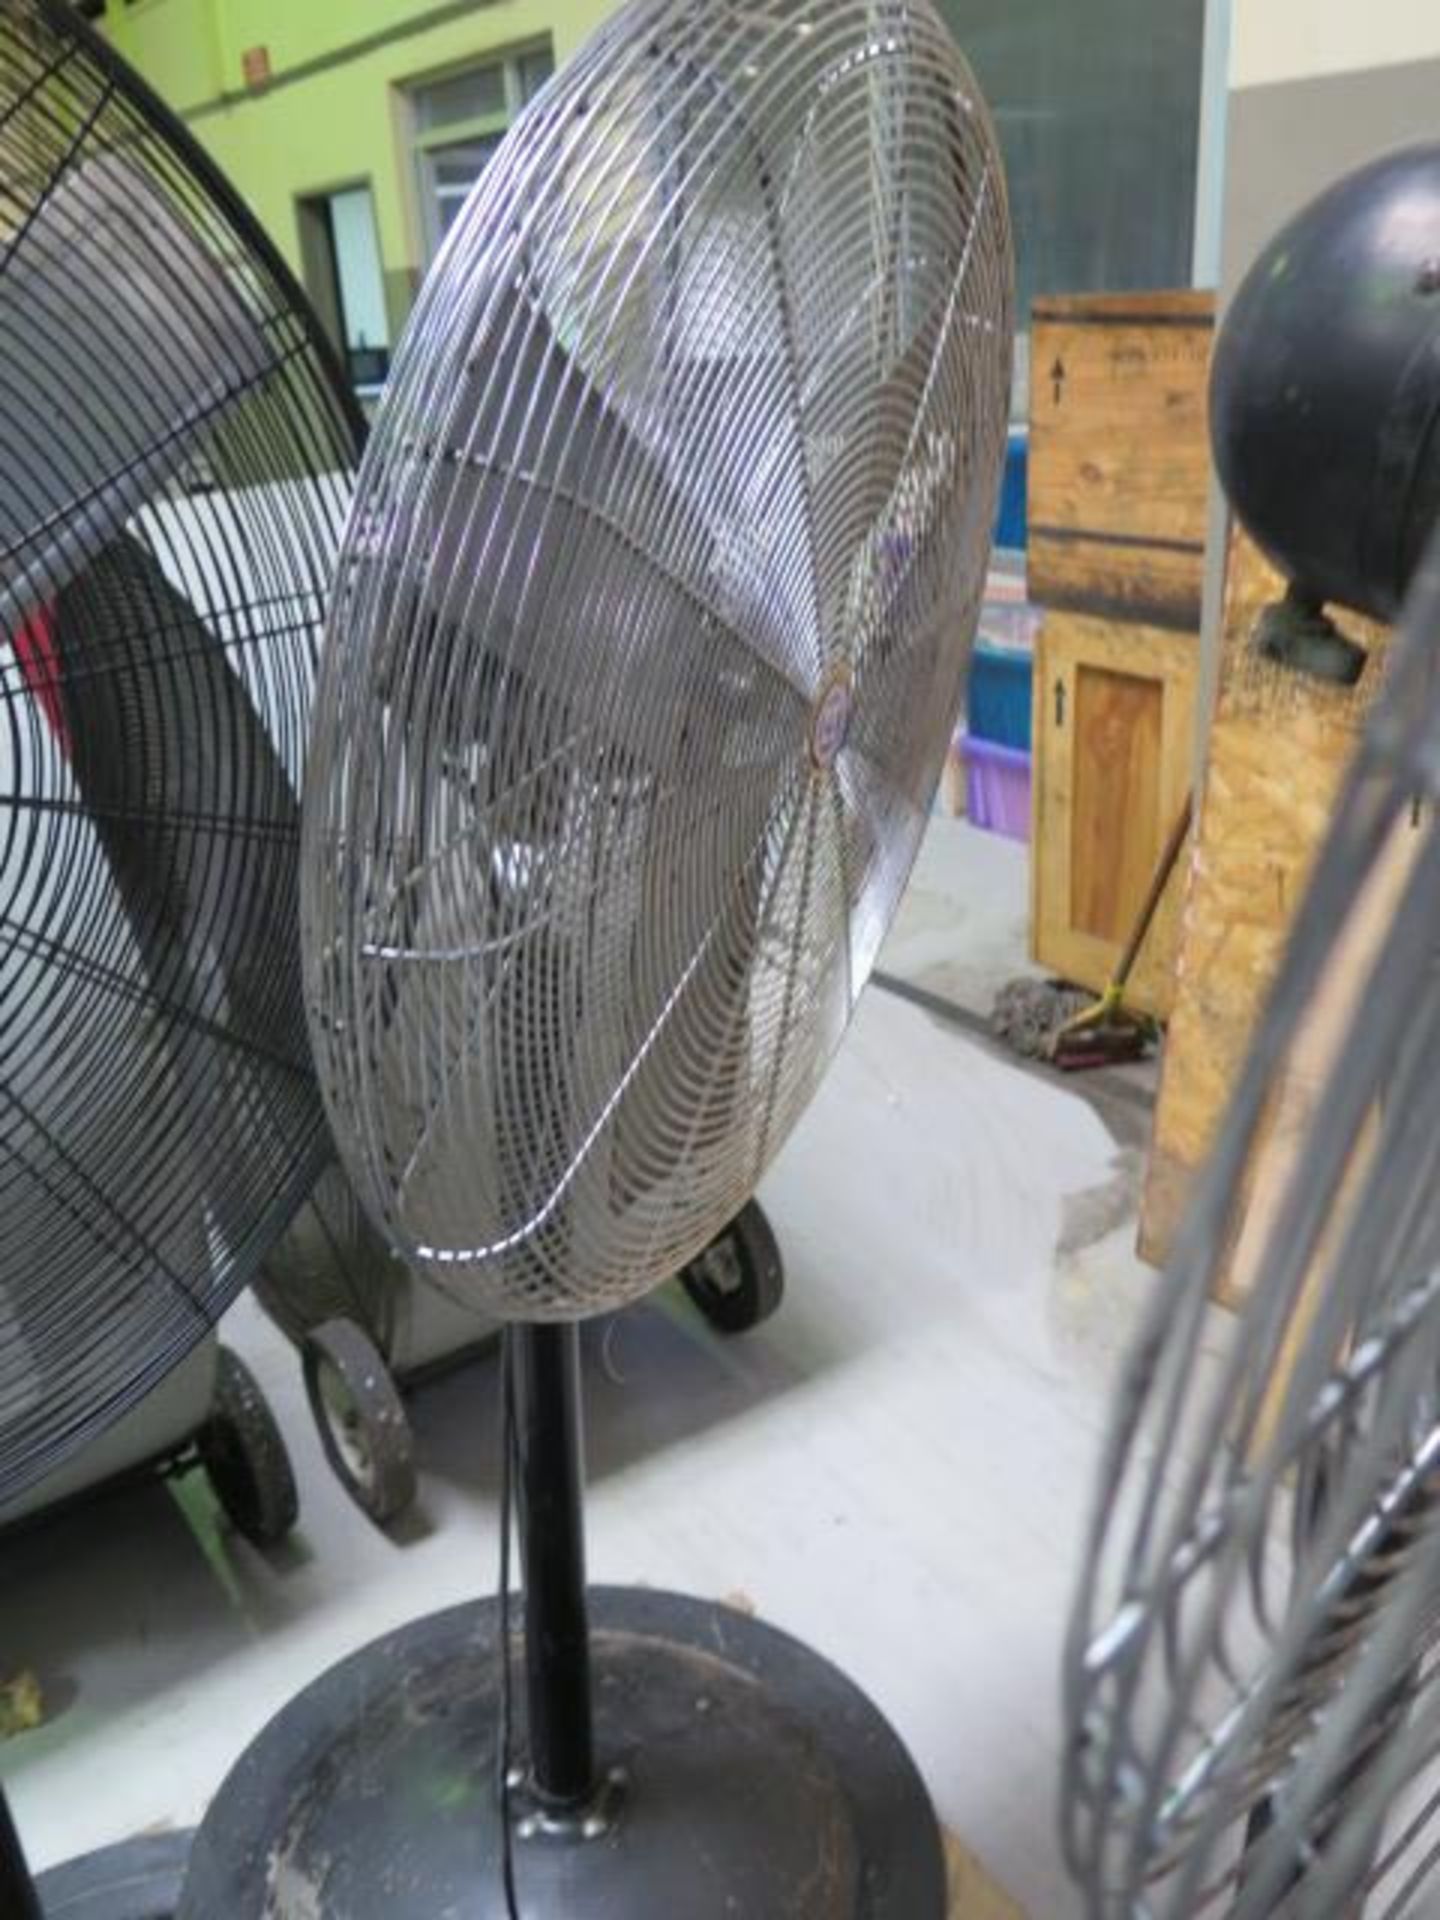 Shop Fans (4) (SOLD AS-IS - NO WARRANTY) - Image 5 of 5